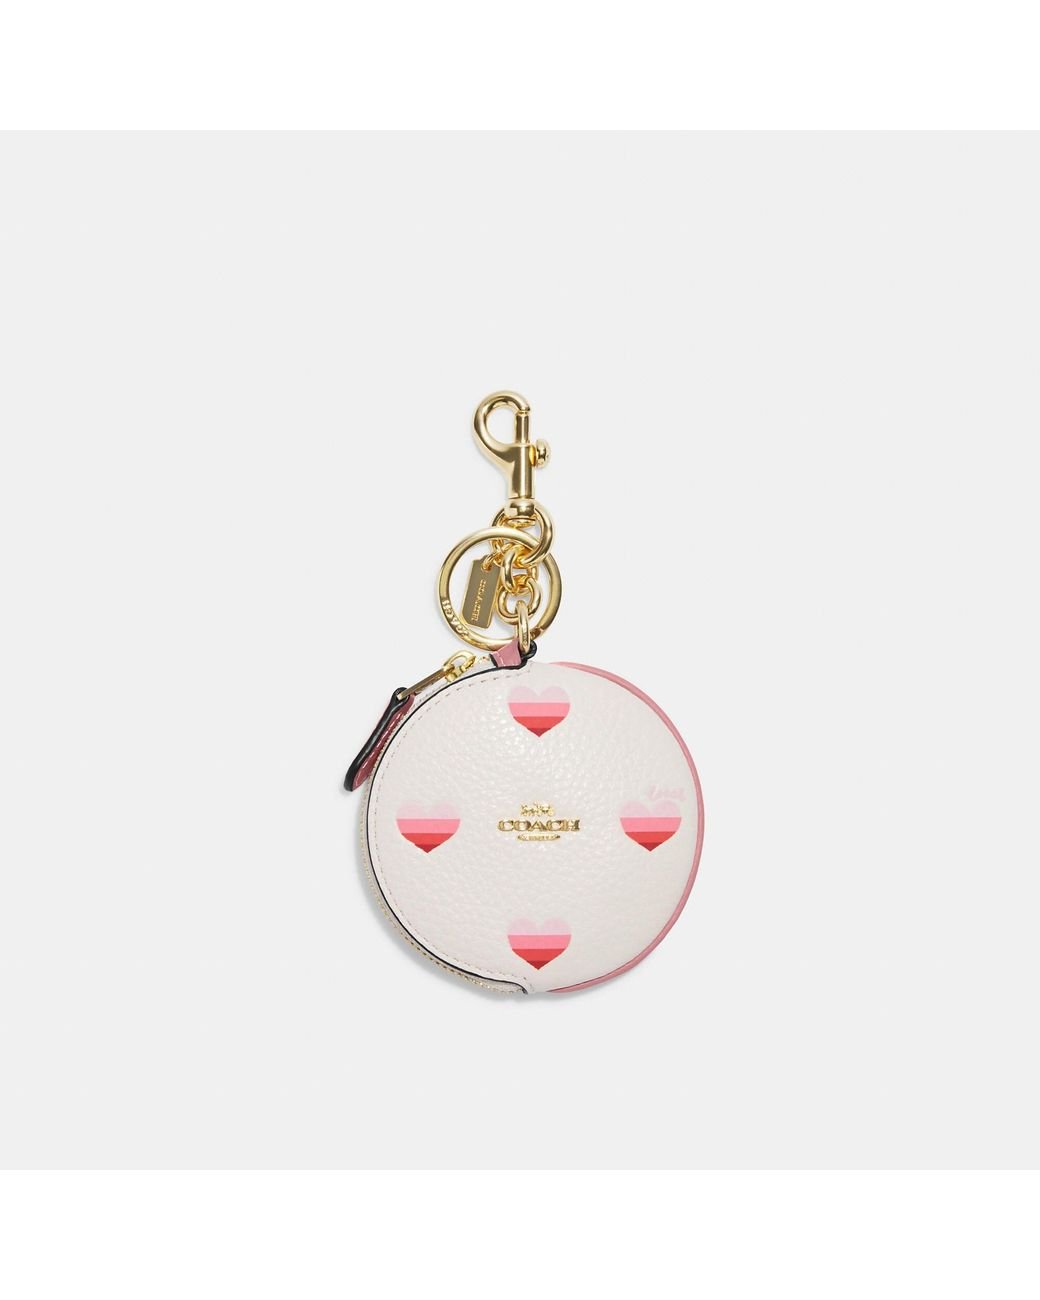 Coach Outlet Circular Coin Pouch With Heart Print in Pink